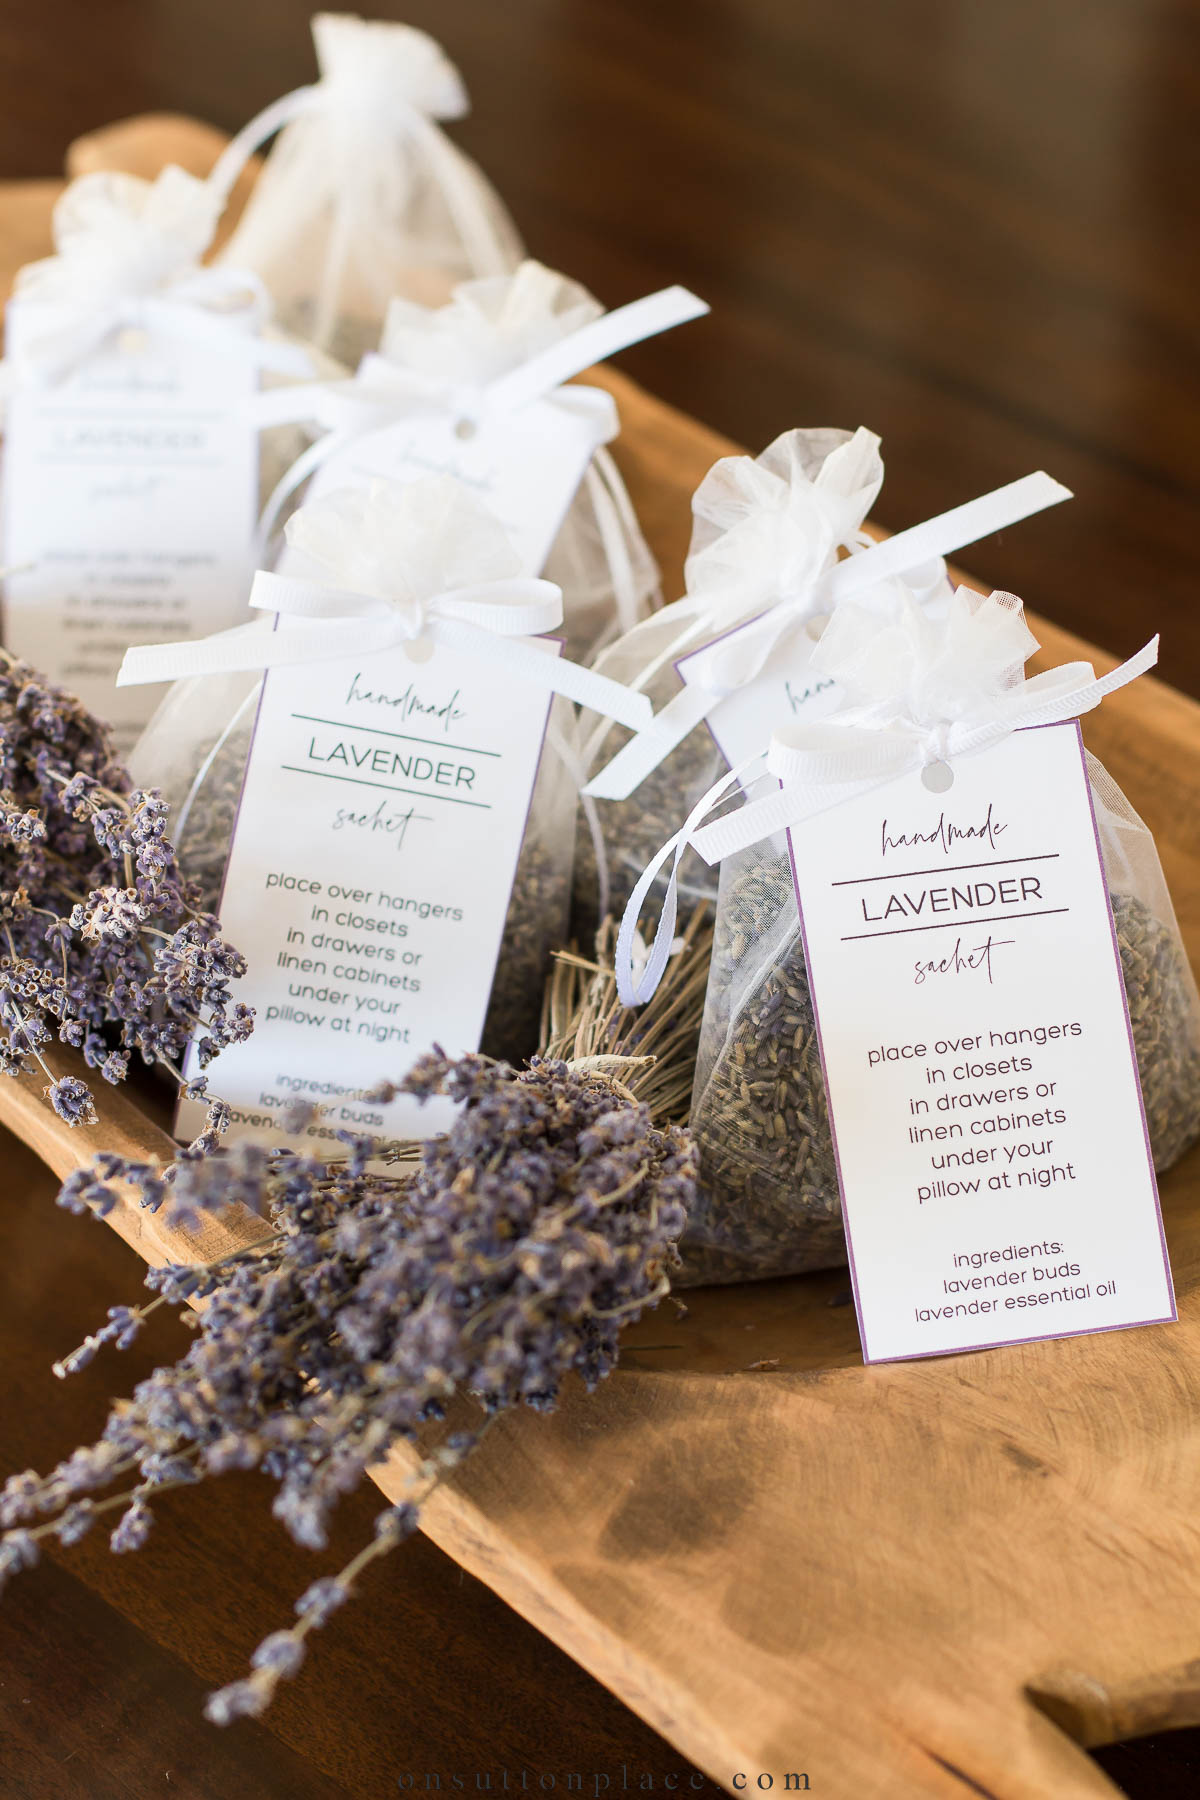 https://www.onsuttonplace.com/wp-content/uploads/2023/02/lavender-sachets-with-custom-tags-2023.jpg